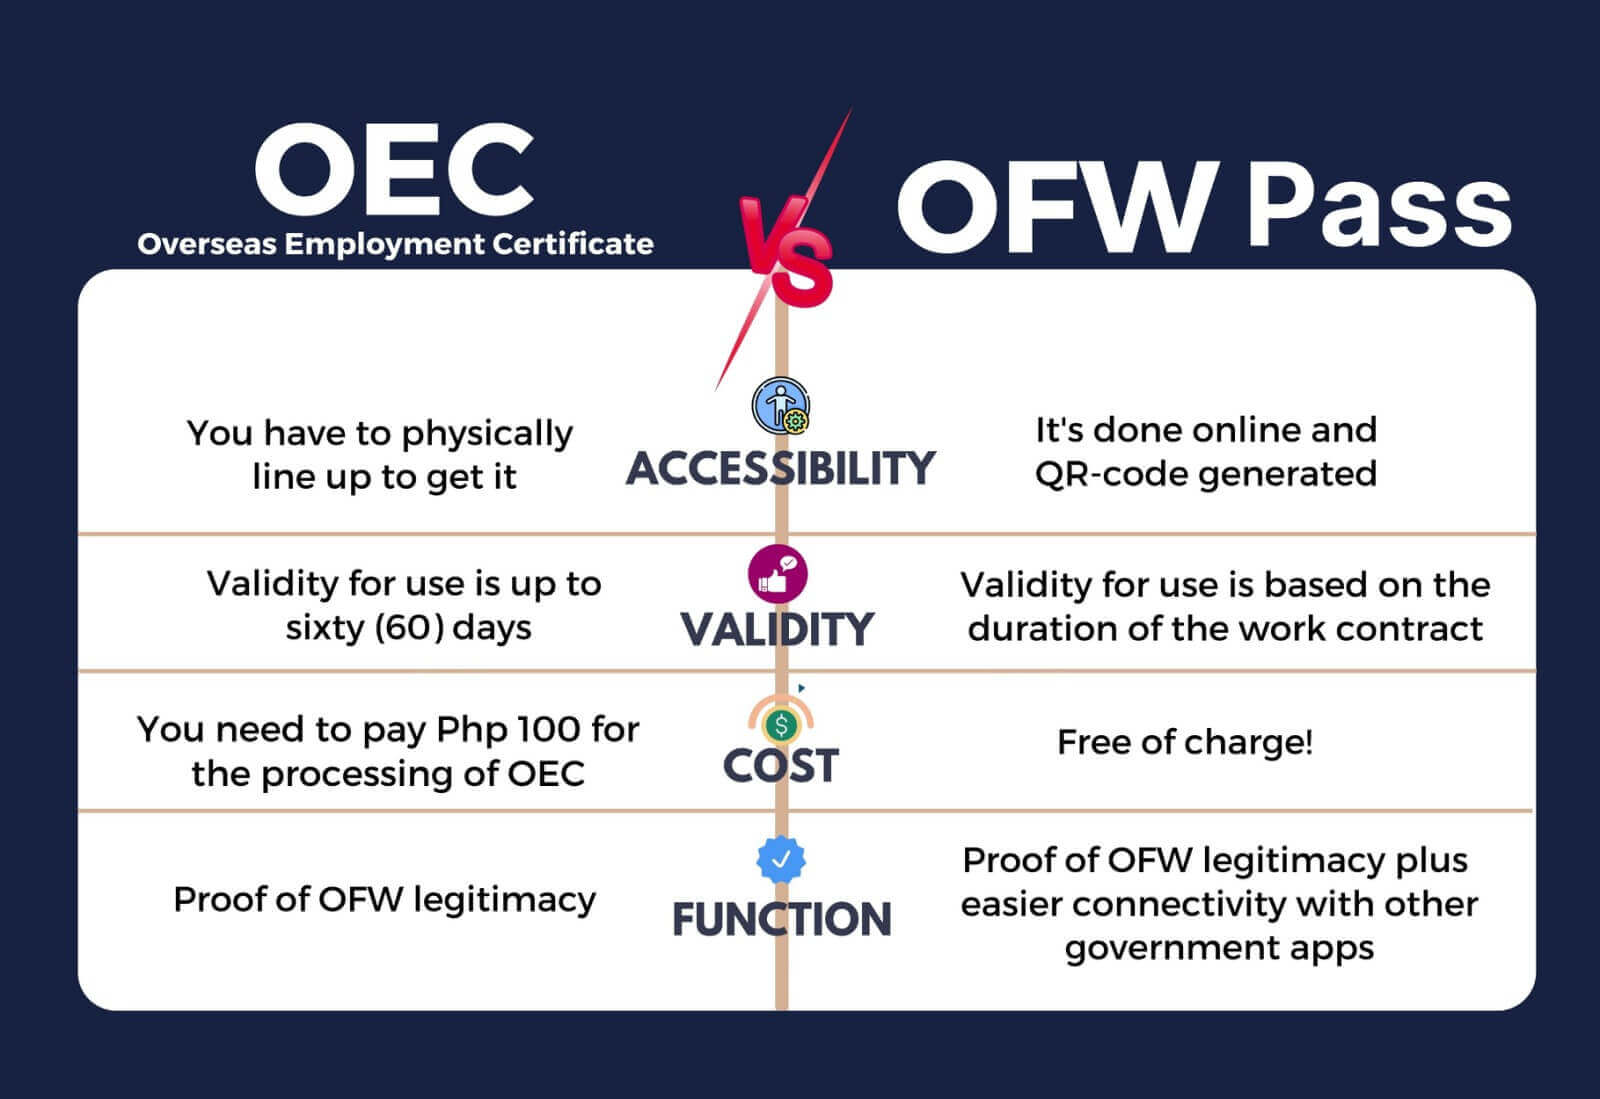 OFW pass and OEC difference